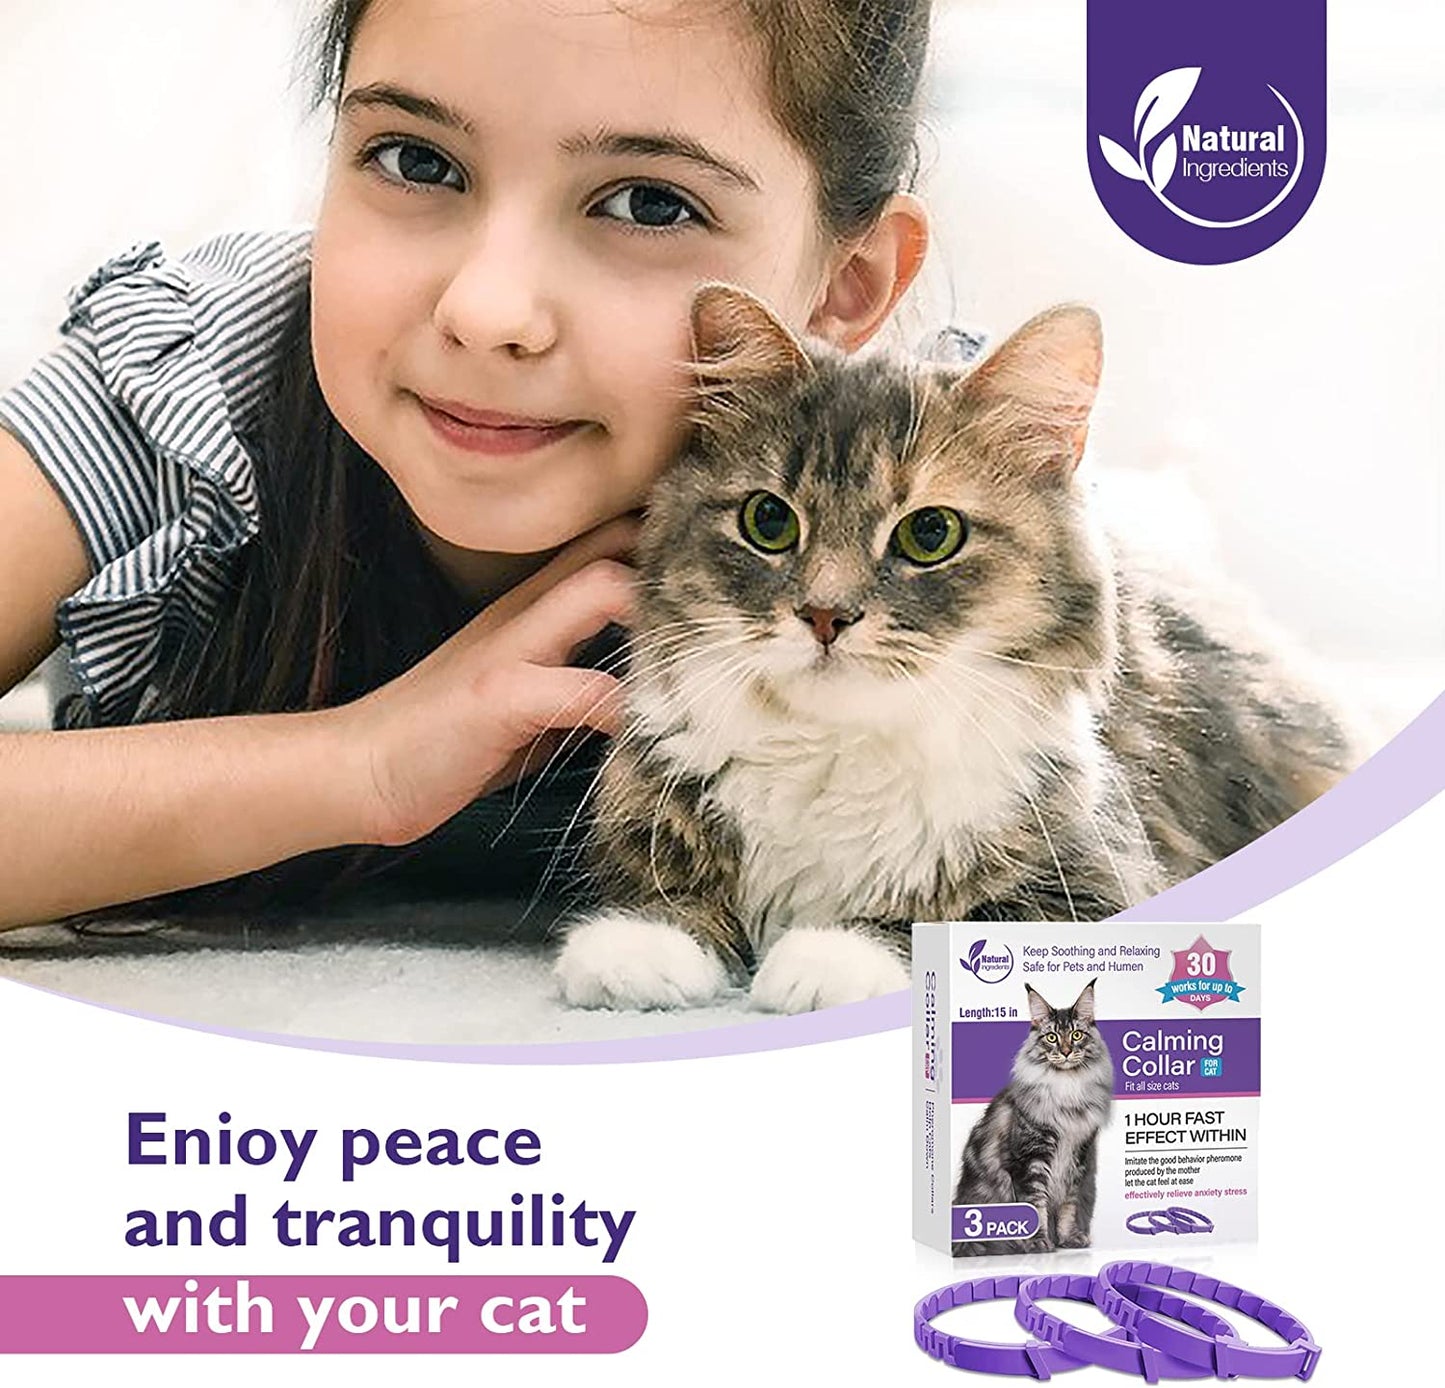 3 Pack Calming Collar Efficient Relieve Reduce Anxiety Stress Pheromones Calm Relaxing Comfortable Breakaway Collars Adjustable for Small, Medium Large Cat, Kittens